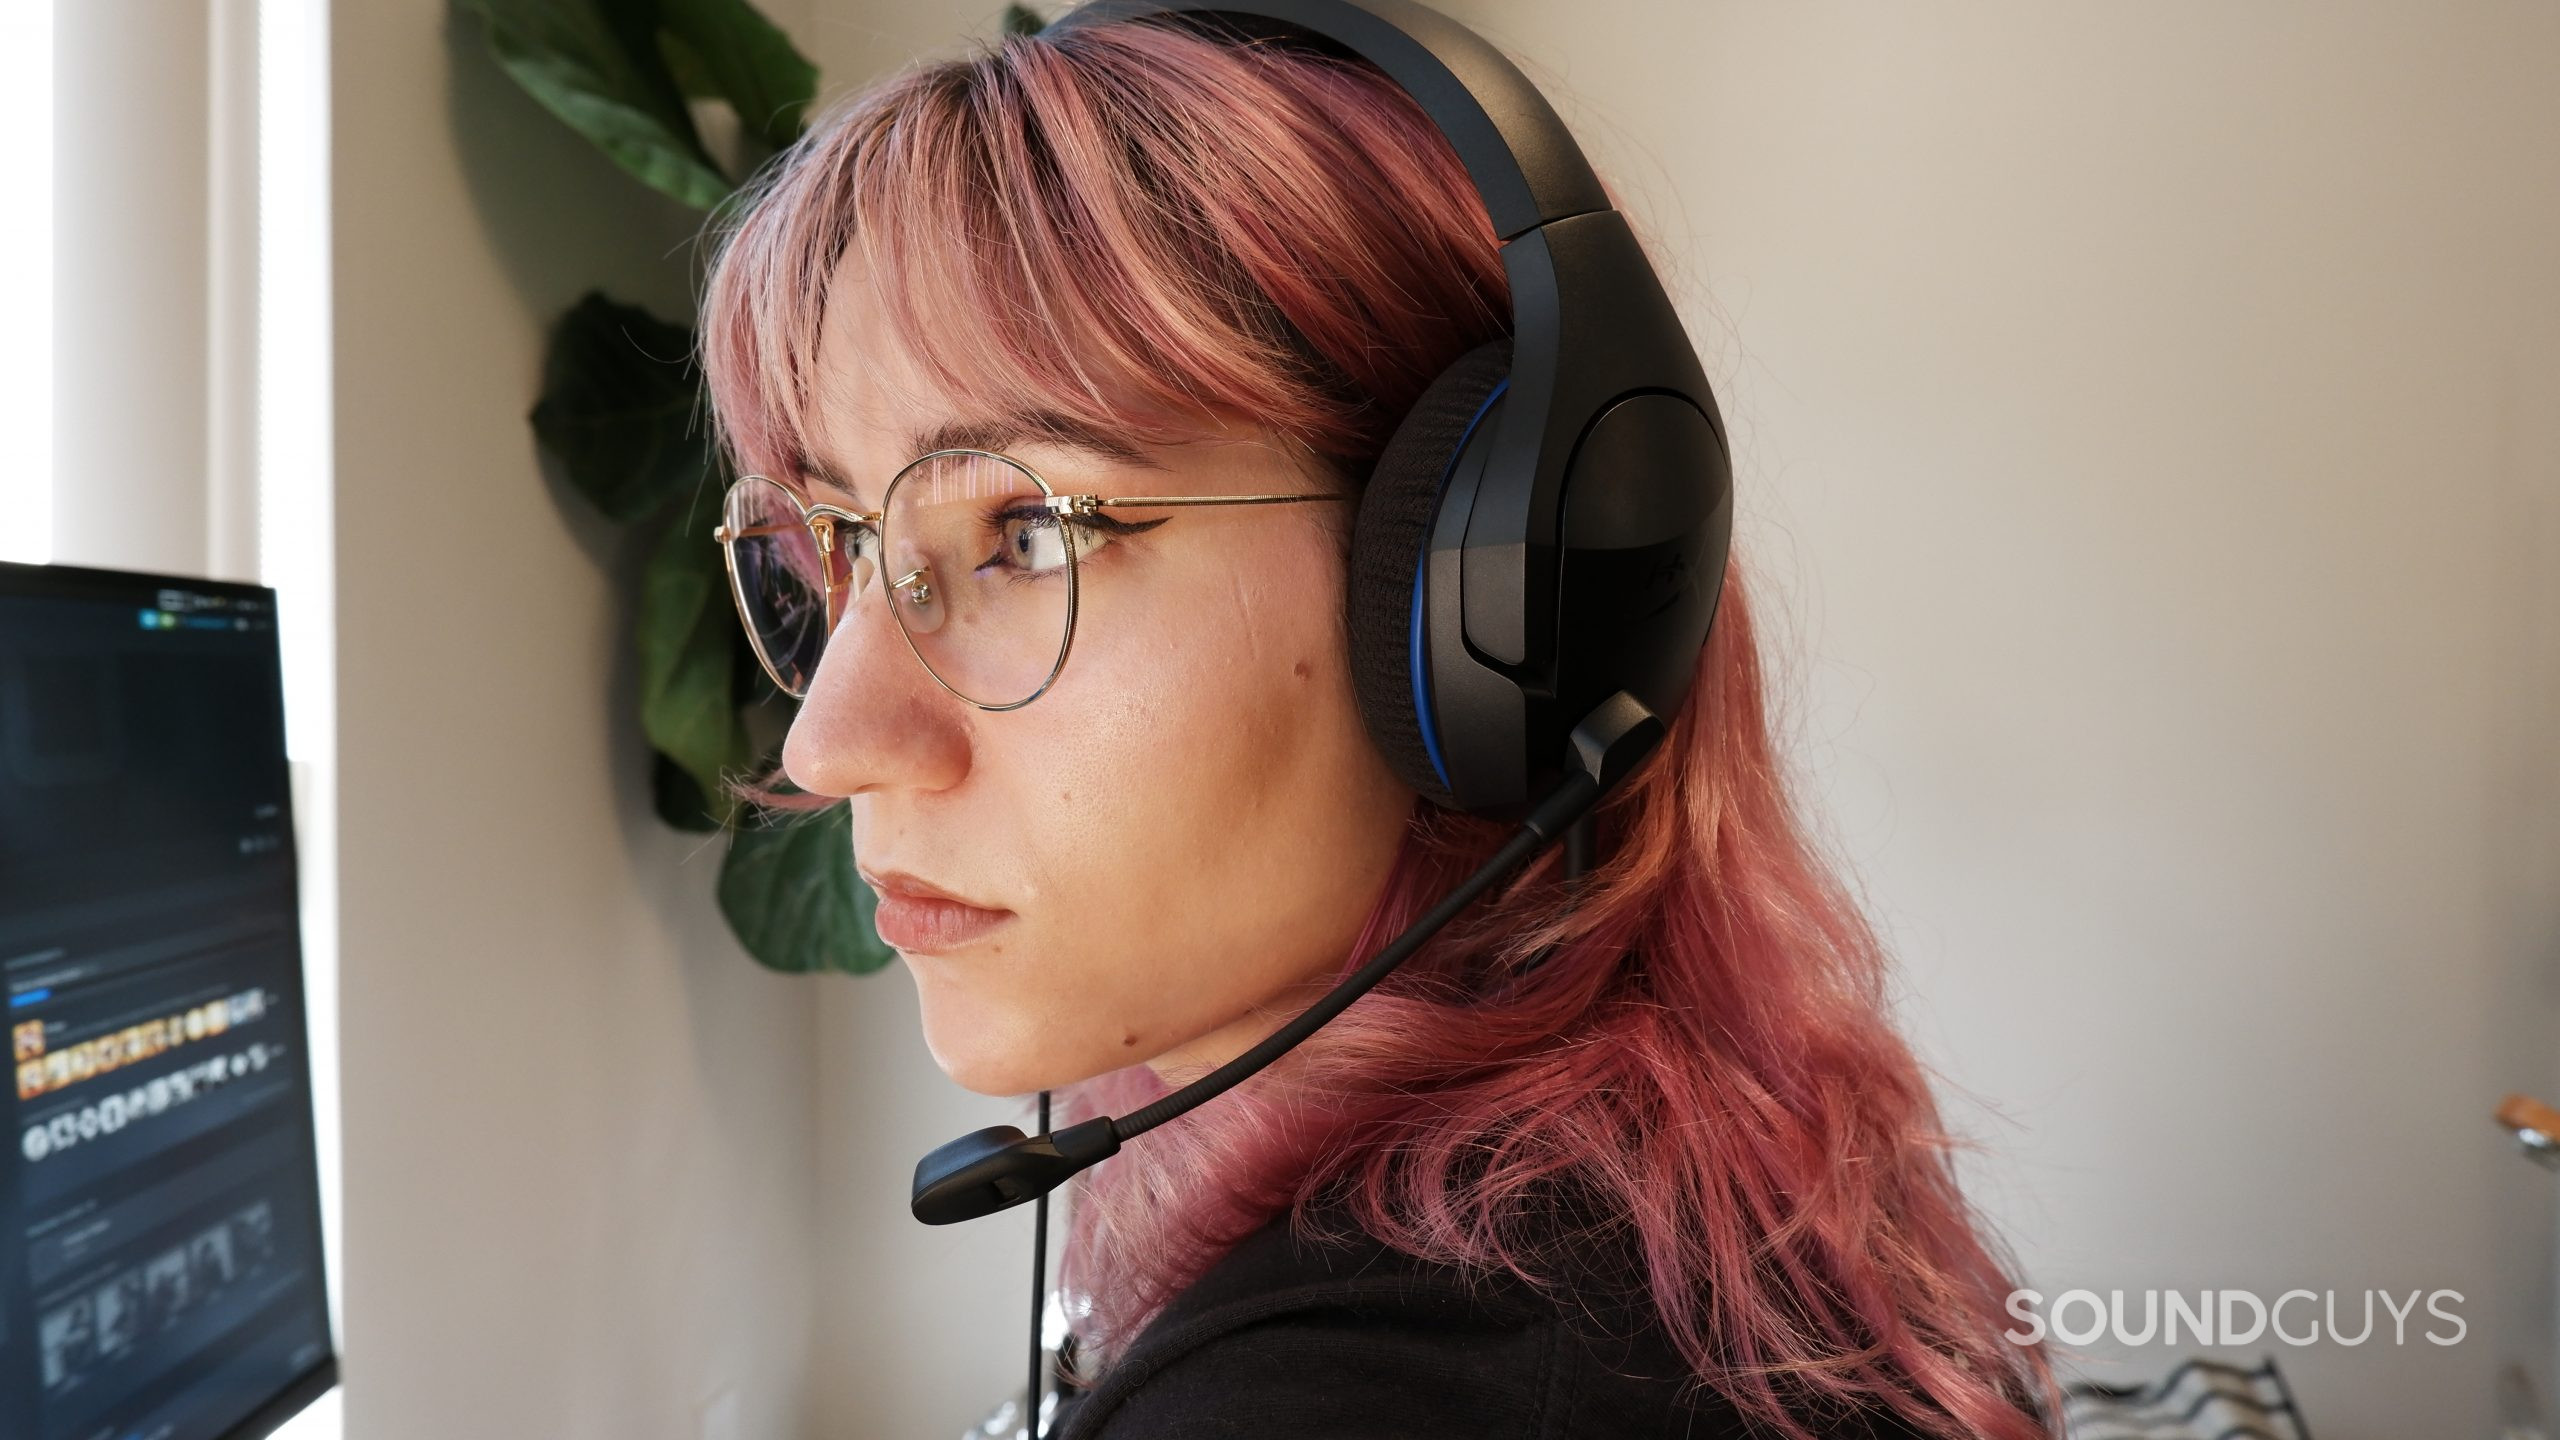 The HyperX Cloud Stinger Core being worn.